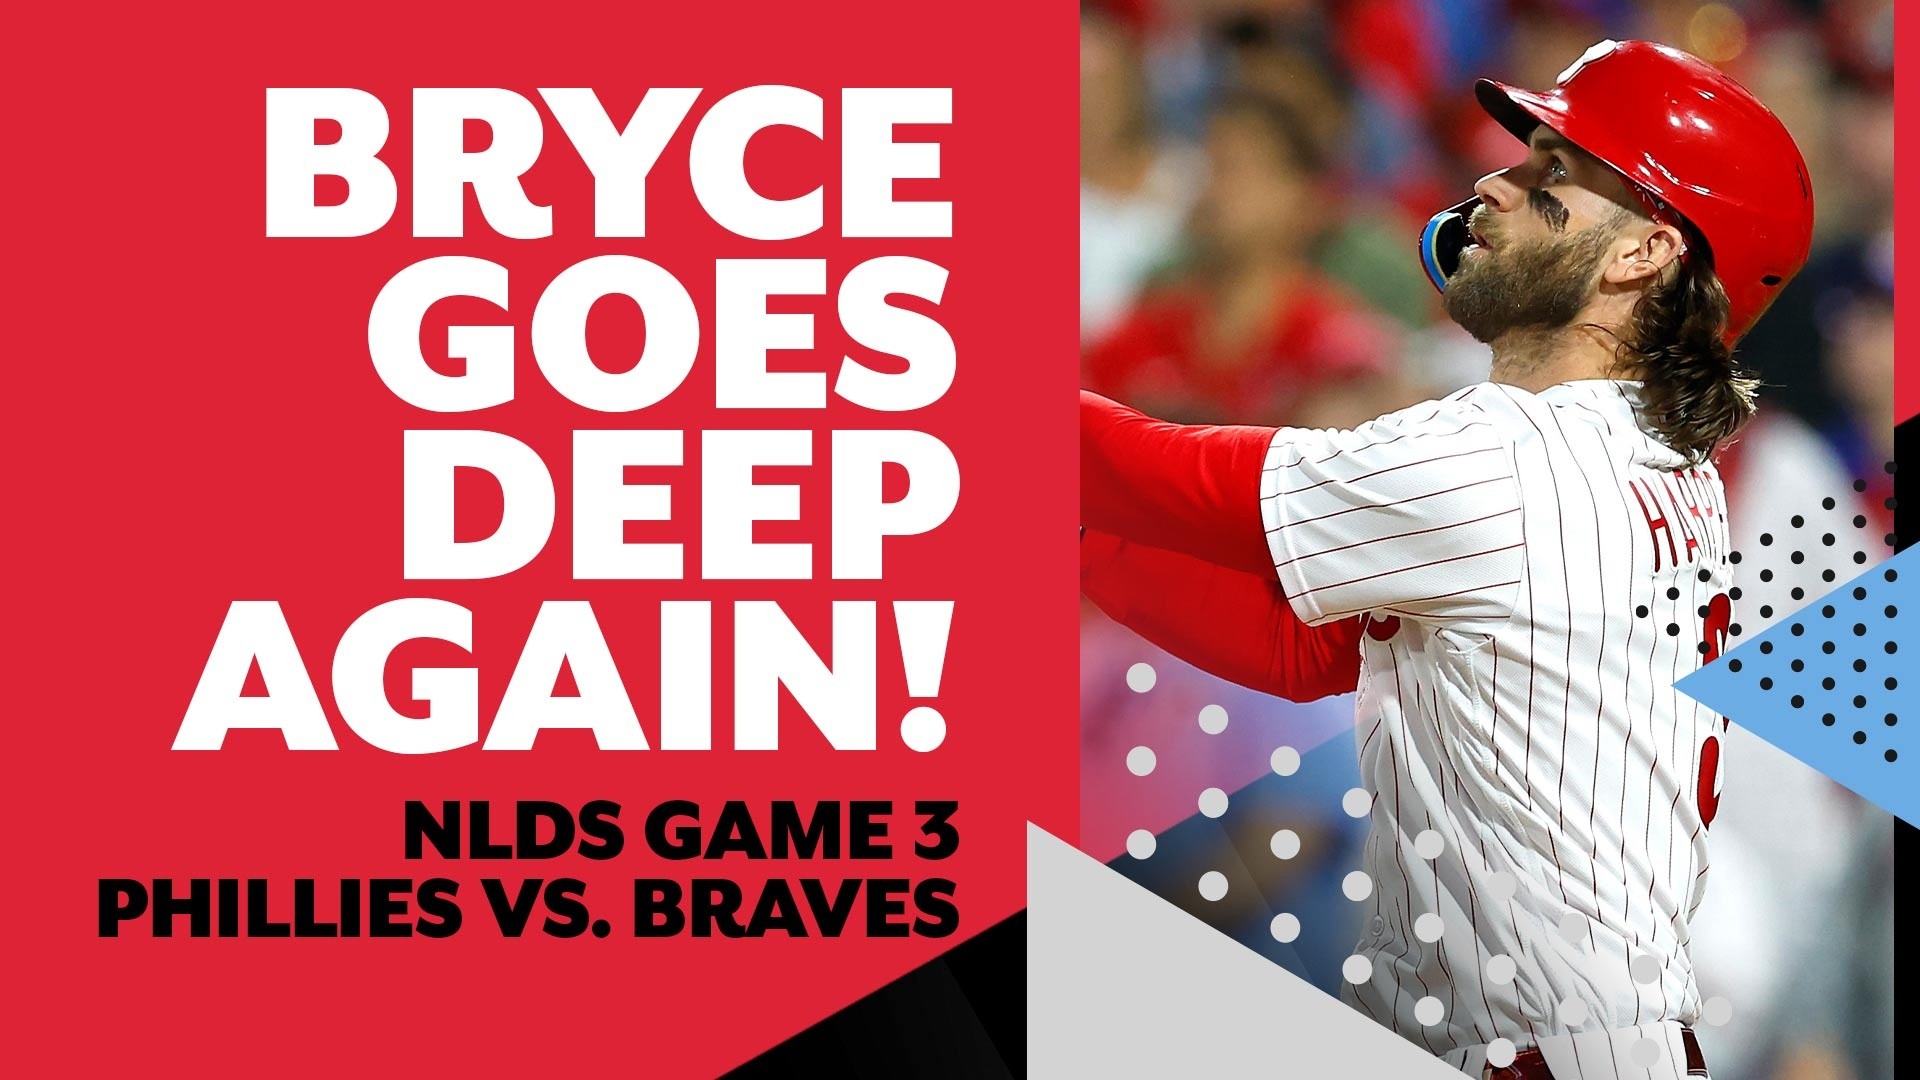 ESPN - Bryce Harper poured it on in Game 3 of the NLDS 💪